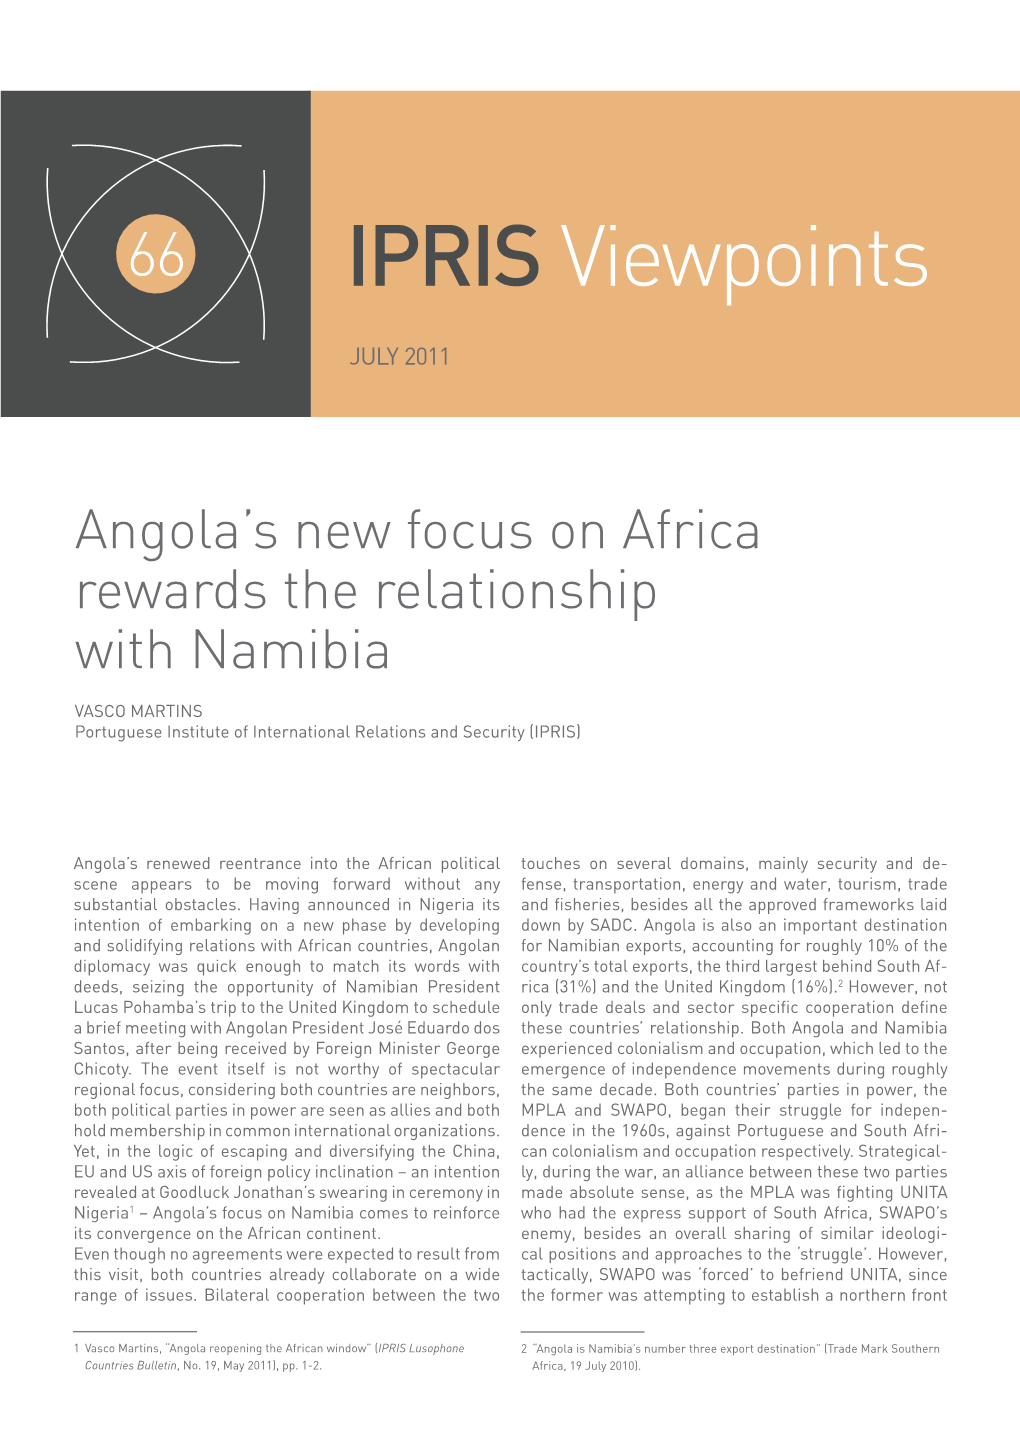 Angola's New Focus on Africa Rewards the Relationship with Namibia